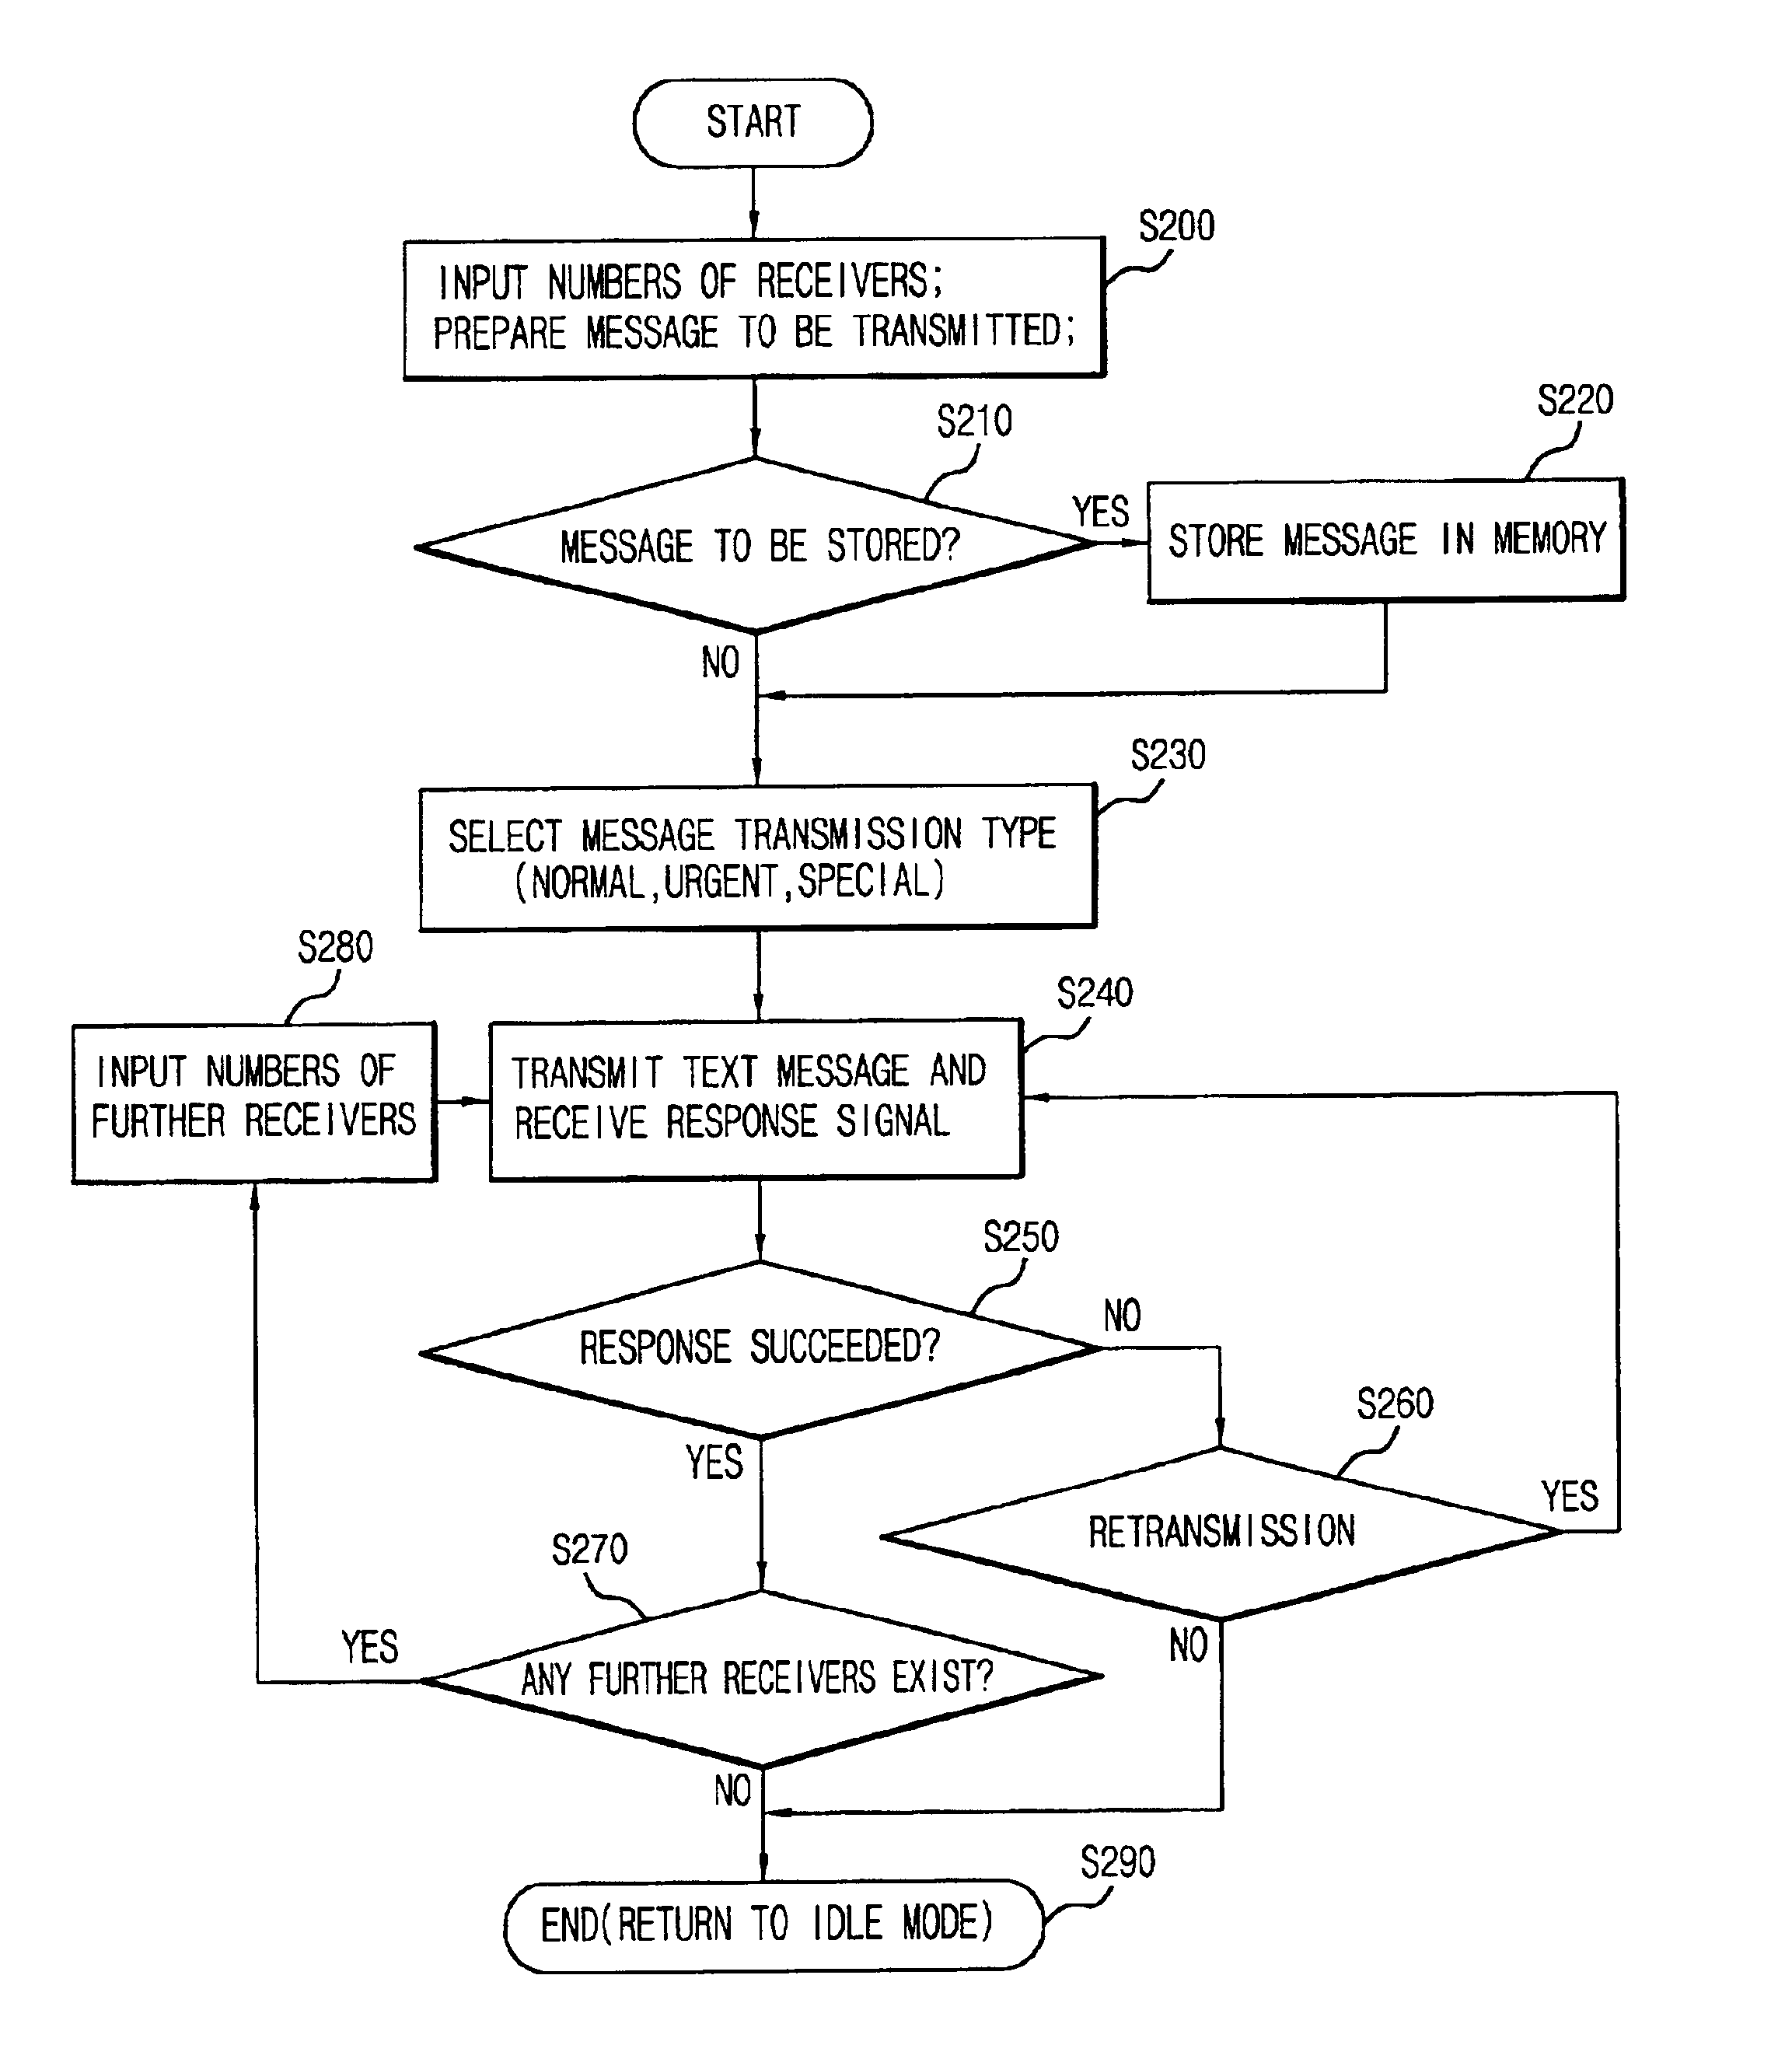 Method of transmitting one text message to many receivers